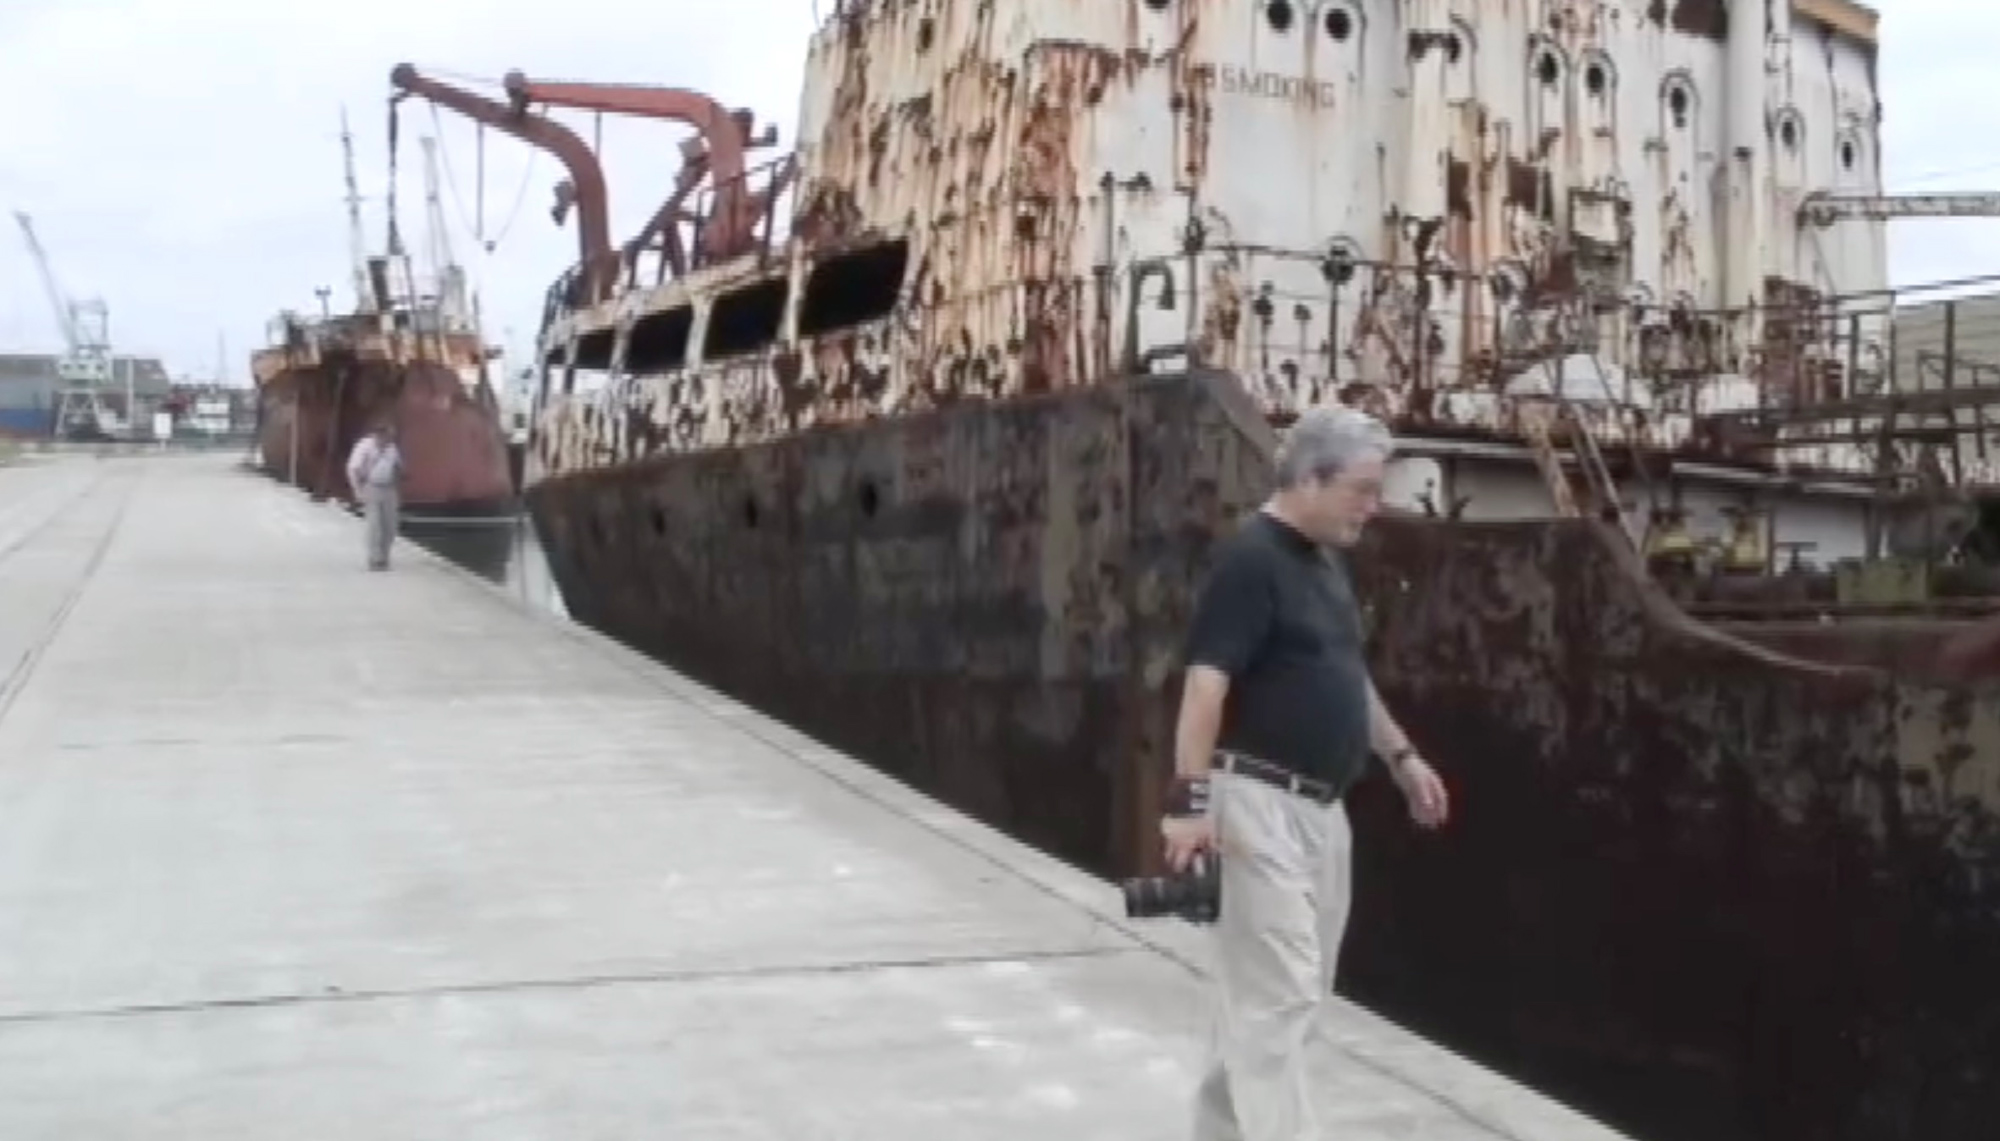 Kevin Raber in the background and Michael Reichmann in the foreground walk along several abandoned ships in the La Boca section of Buenos Aires.